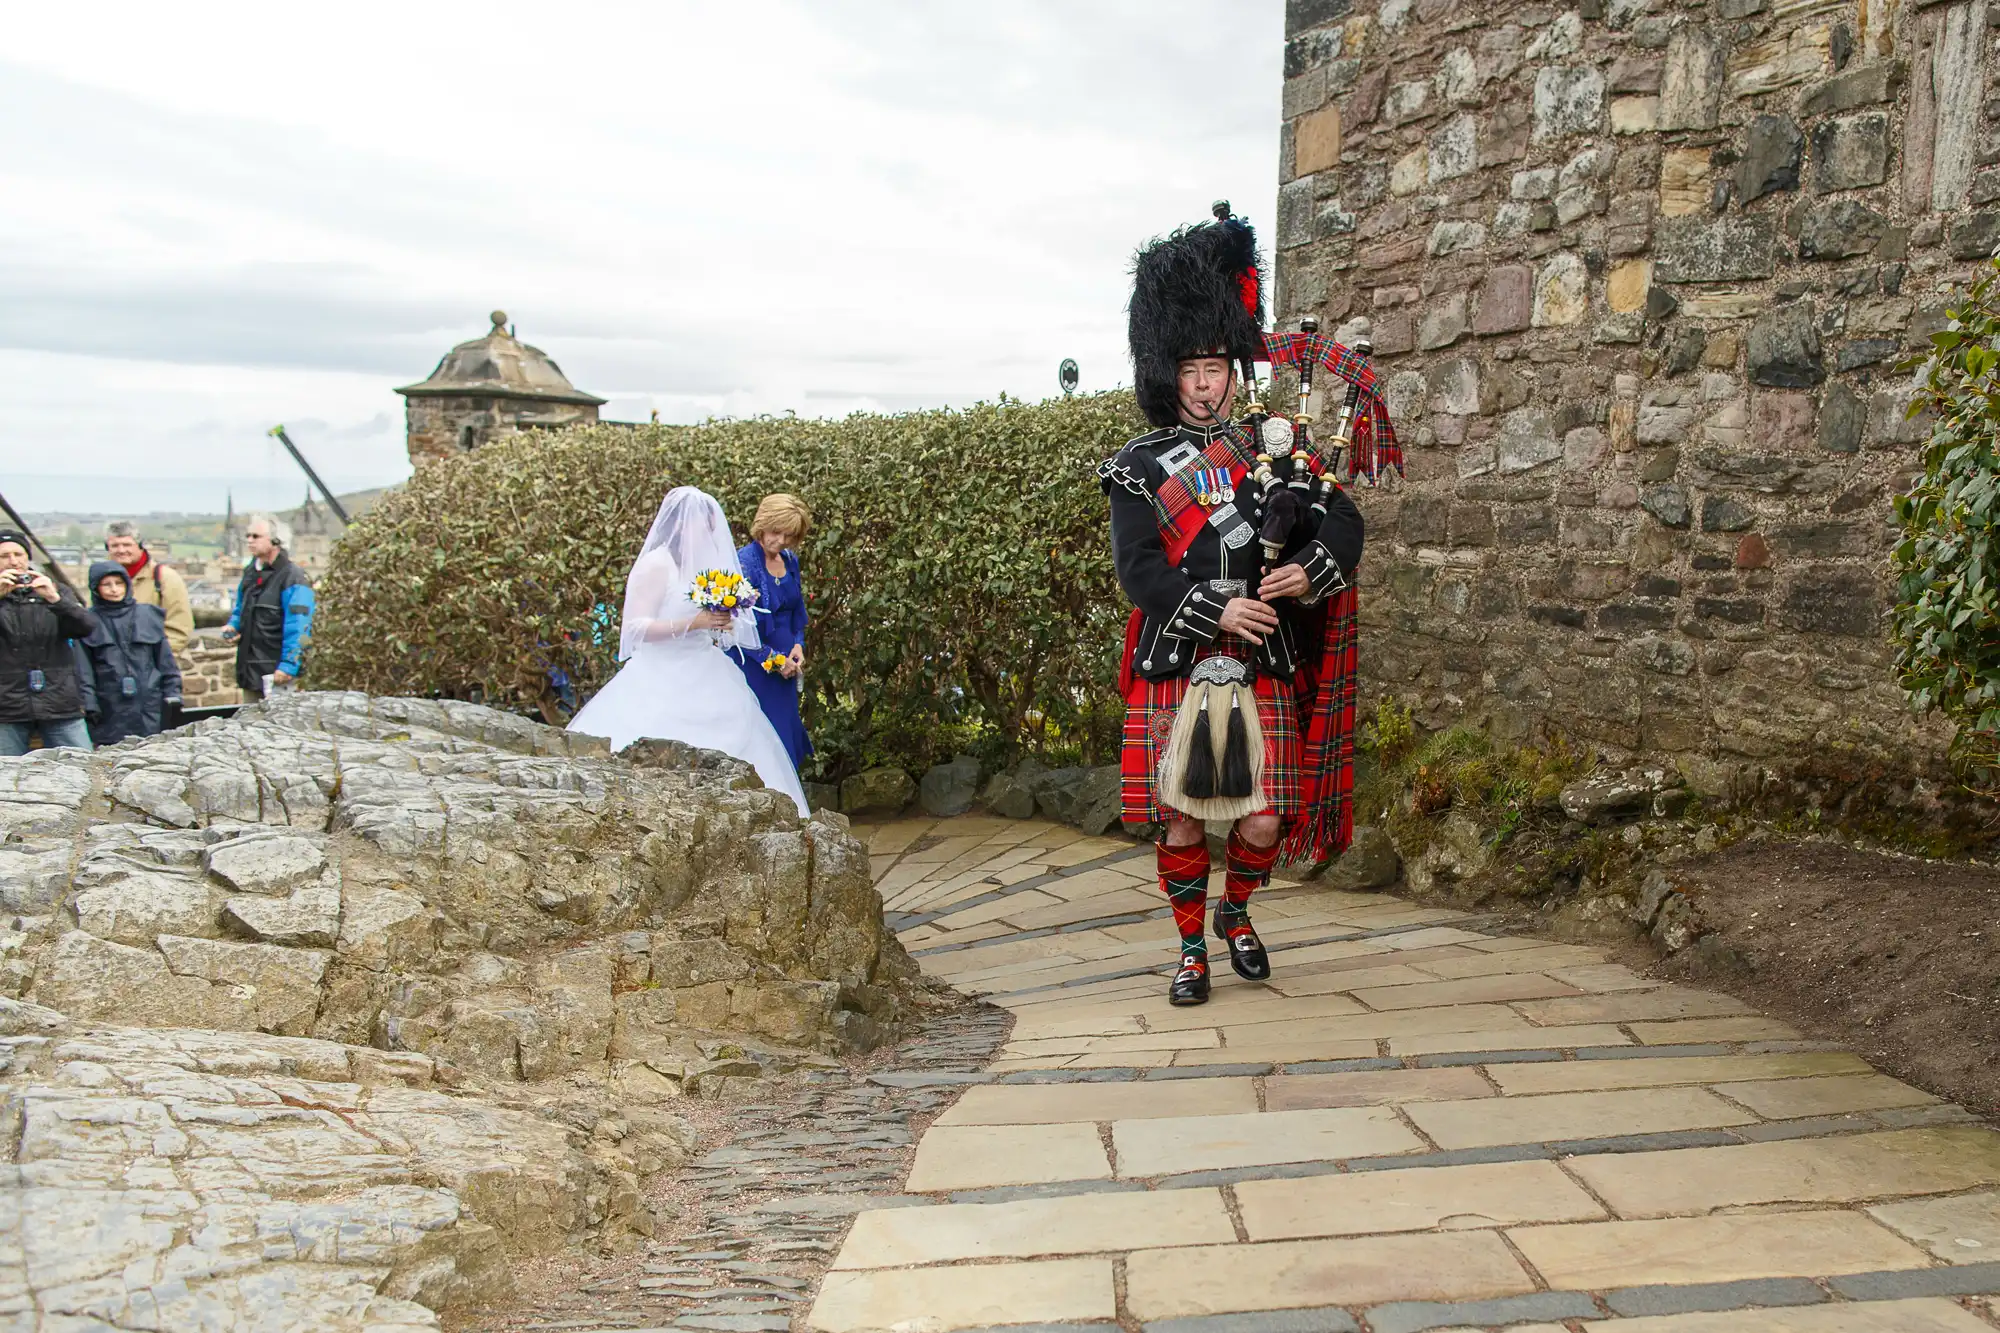 A bagpiper in traditional scottish attire leads a bride along a stone path at an outdoor wedding ceremony.